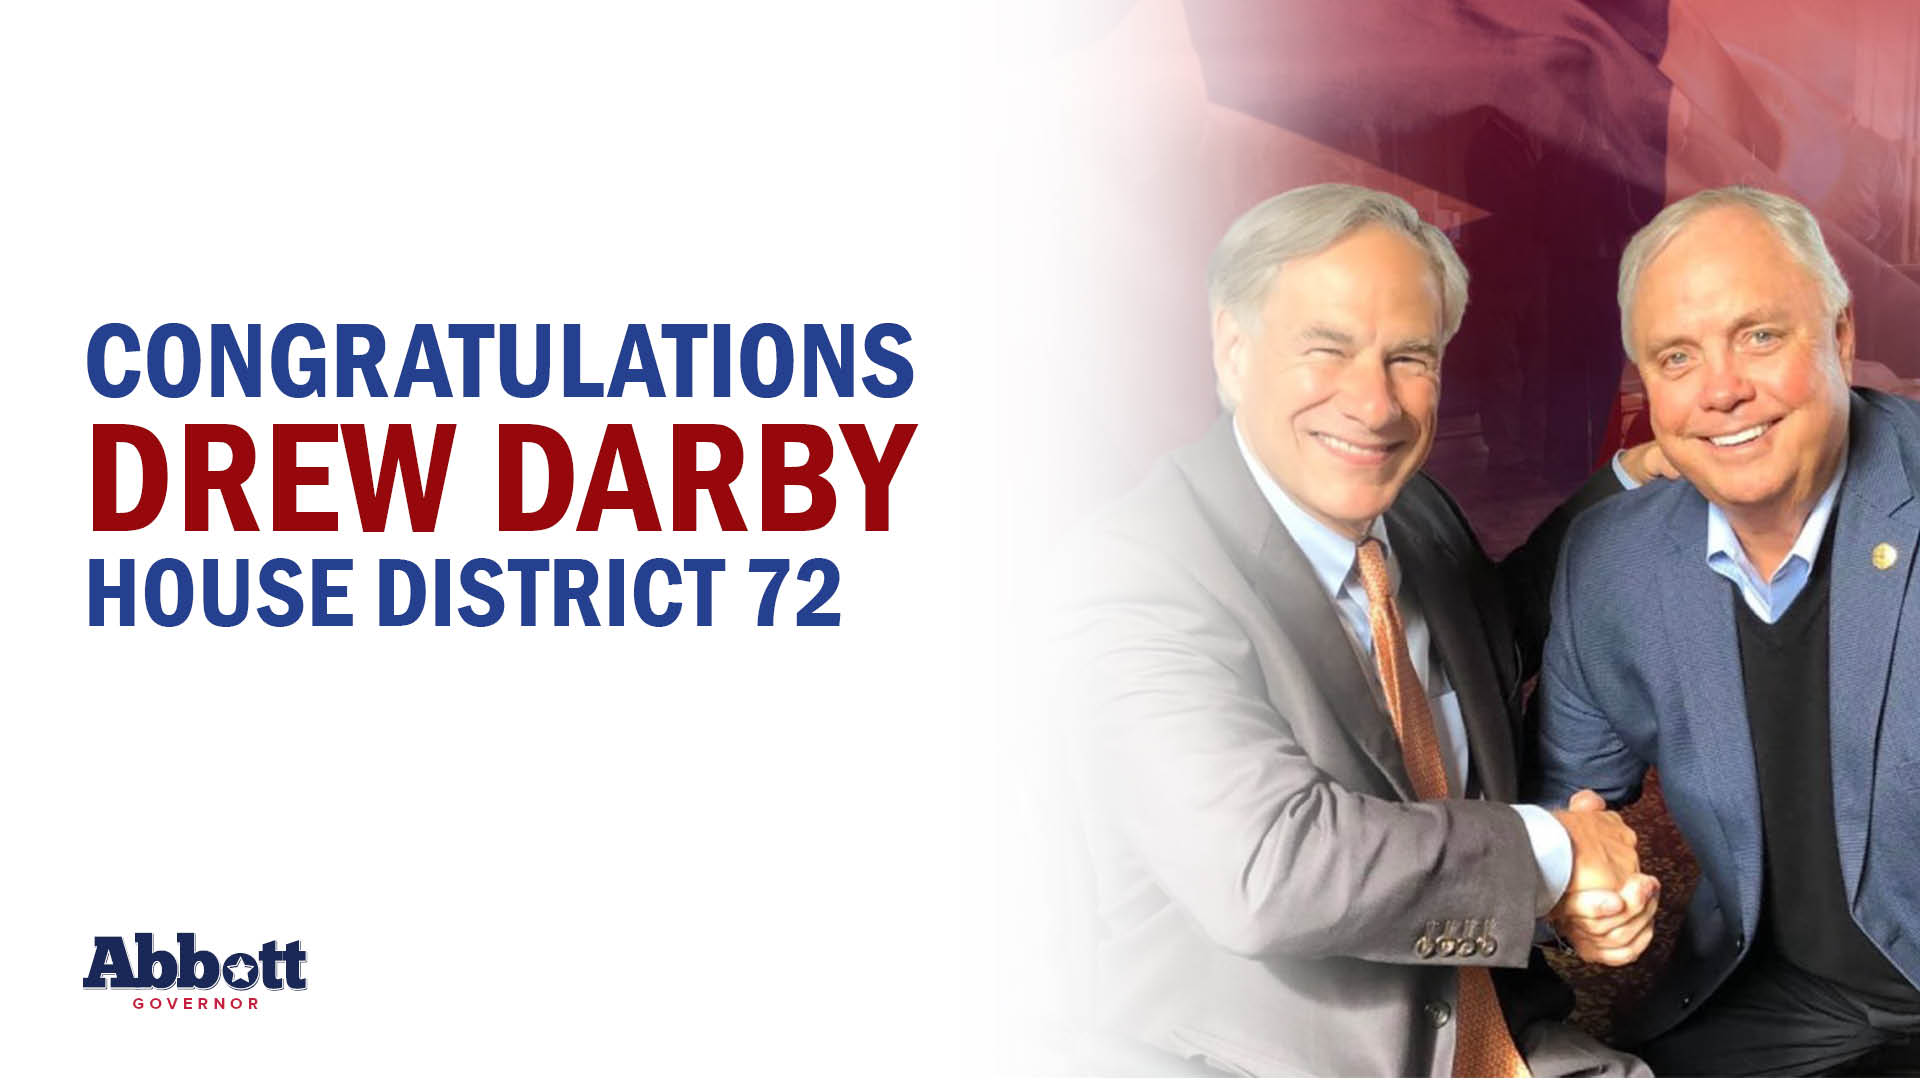 Governor Abbott Statement On Representative Drew Darby’s Win In House District 72